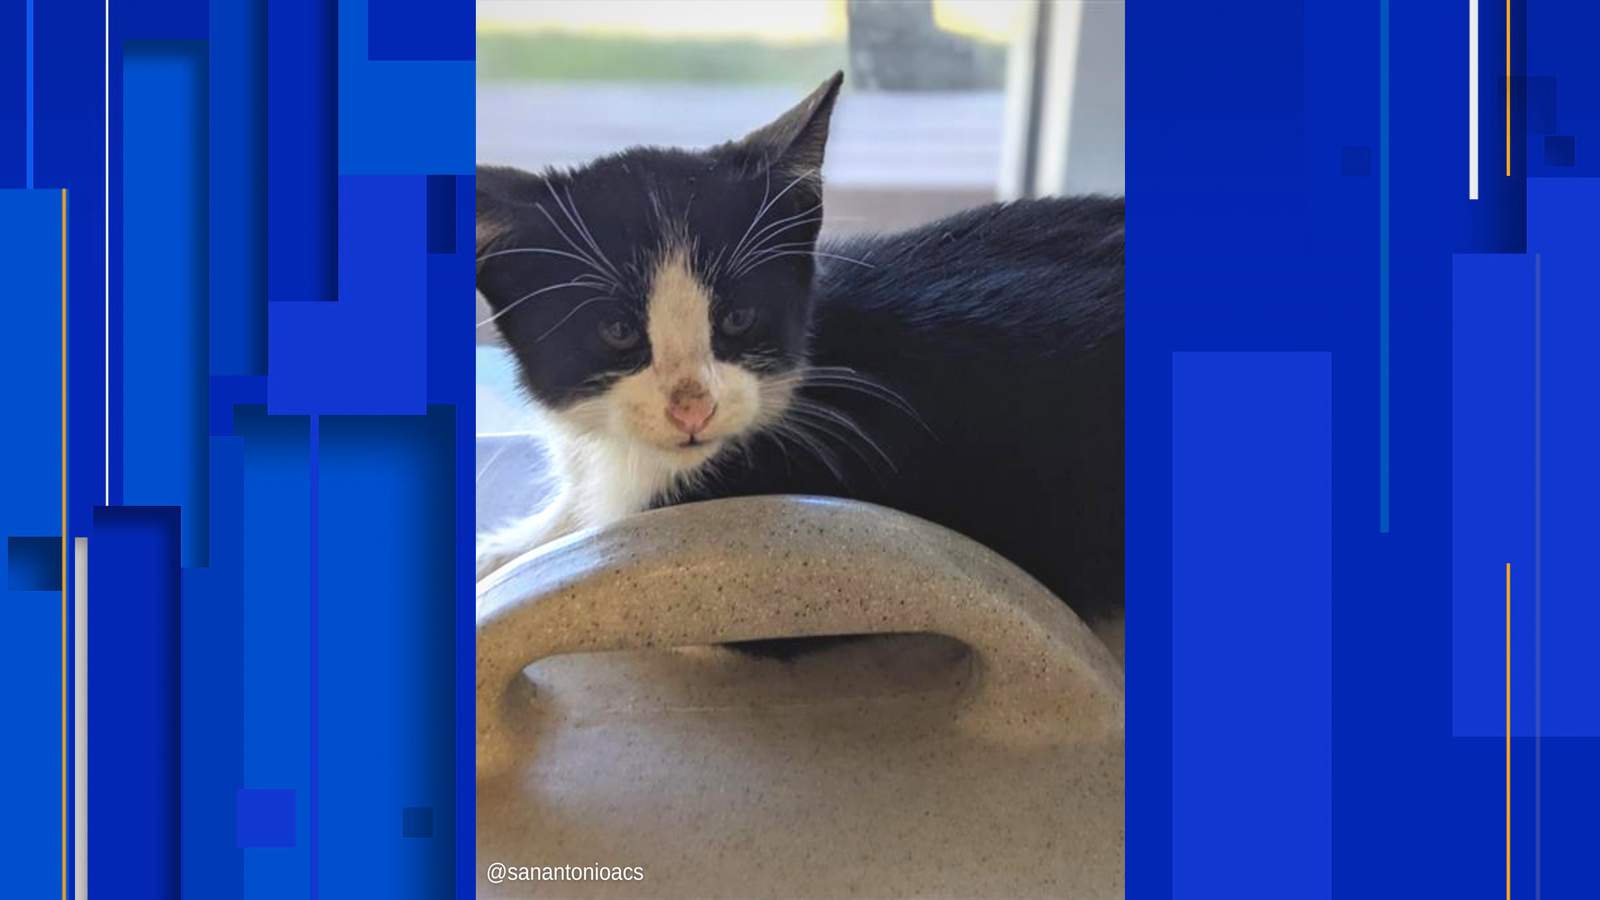 ACS officers rescue kitten found ‘frantically crying,’ surrounded by trash in drainage inlet